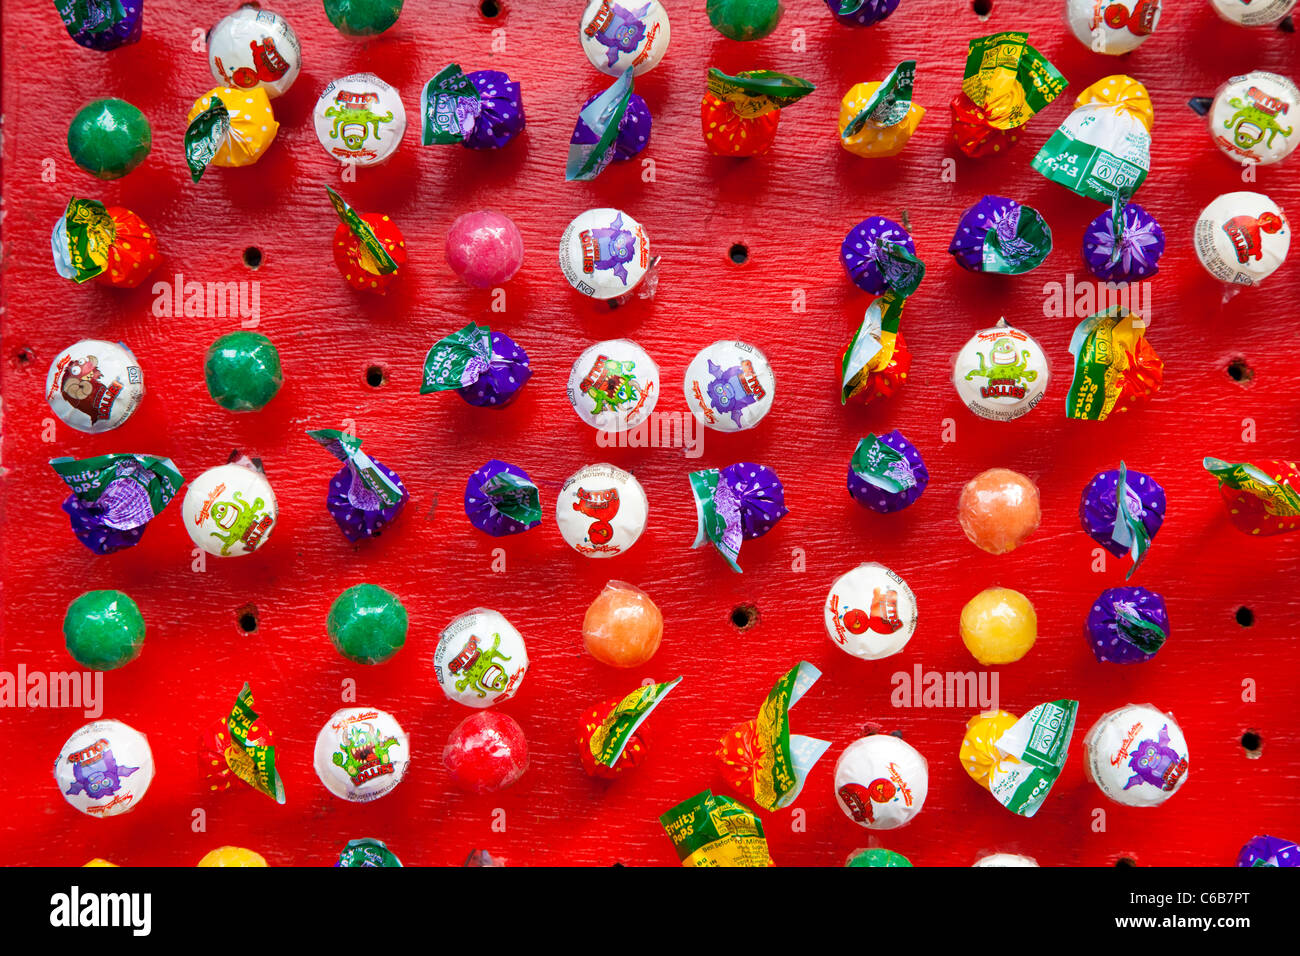 Wrapped sweet lollies on a red board Stock Photo